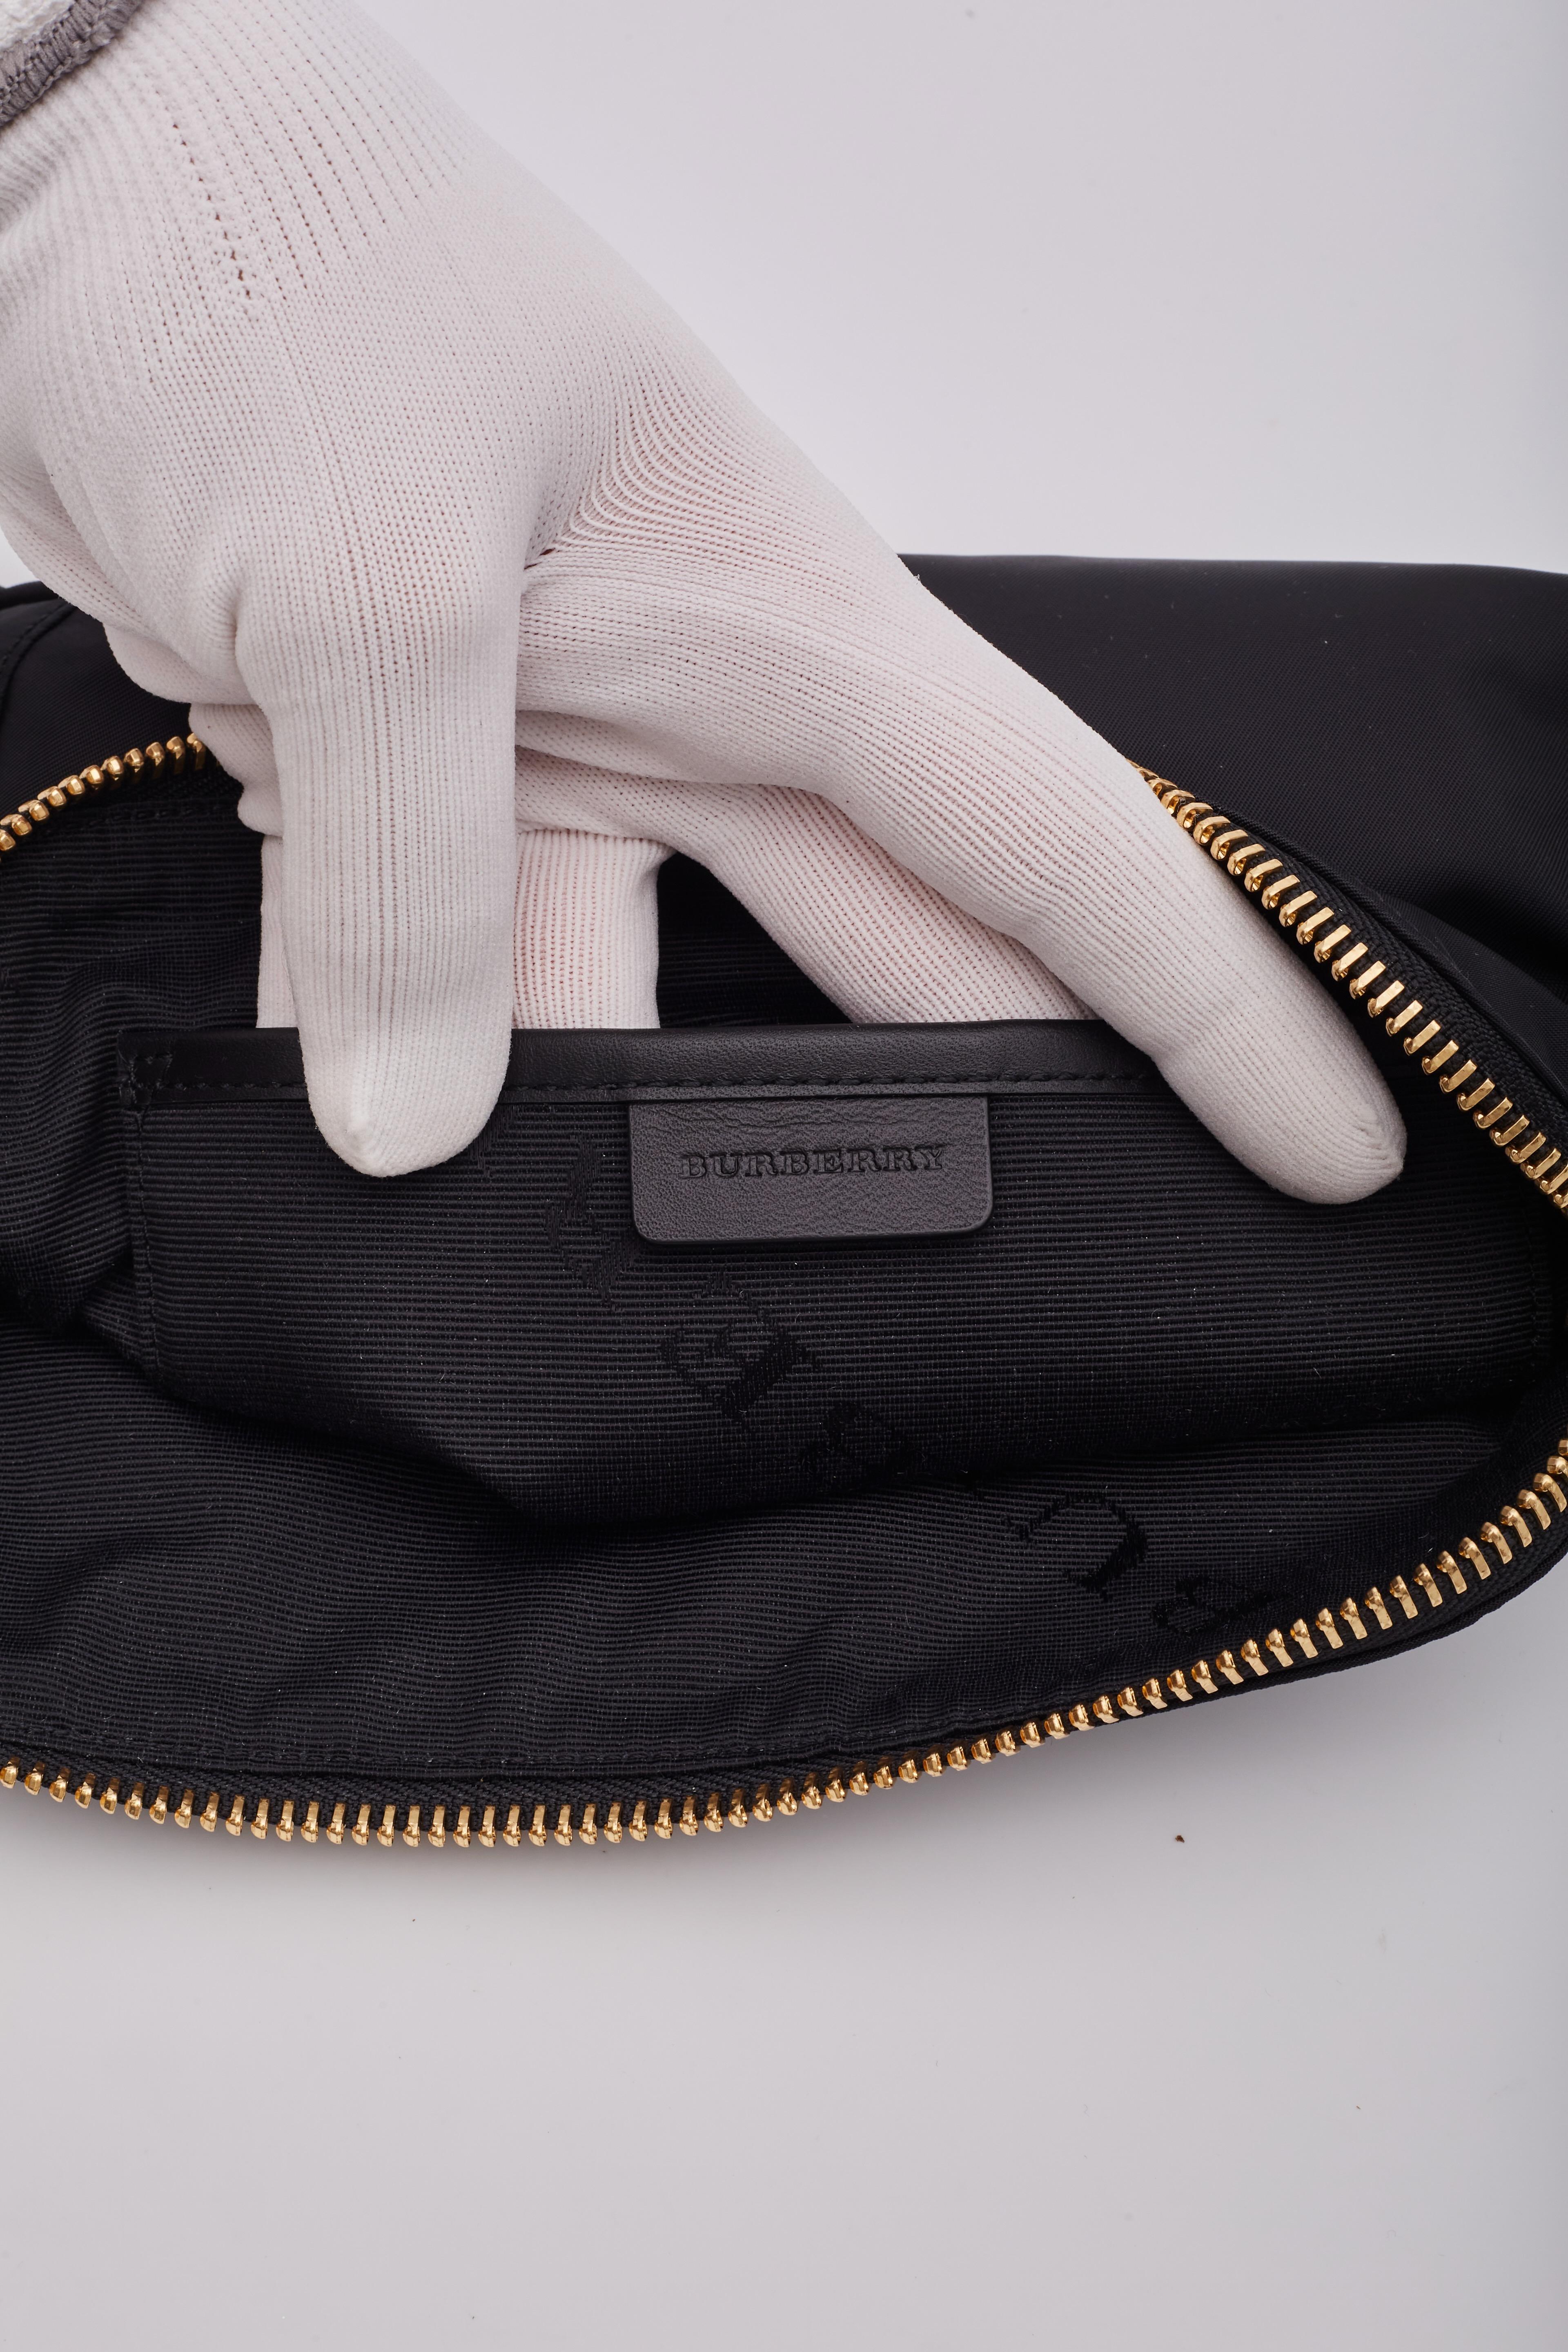 Burberry Black Nylon Technical Vanity Pouch Small For Sale 5